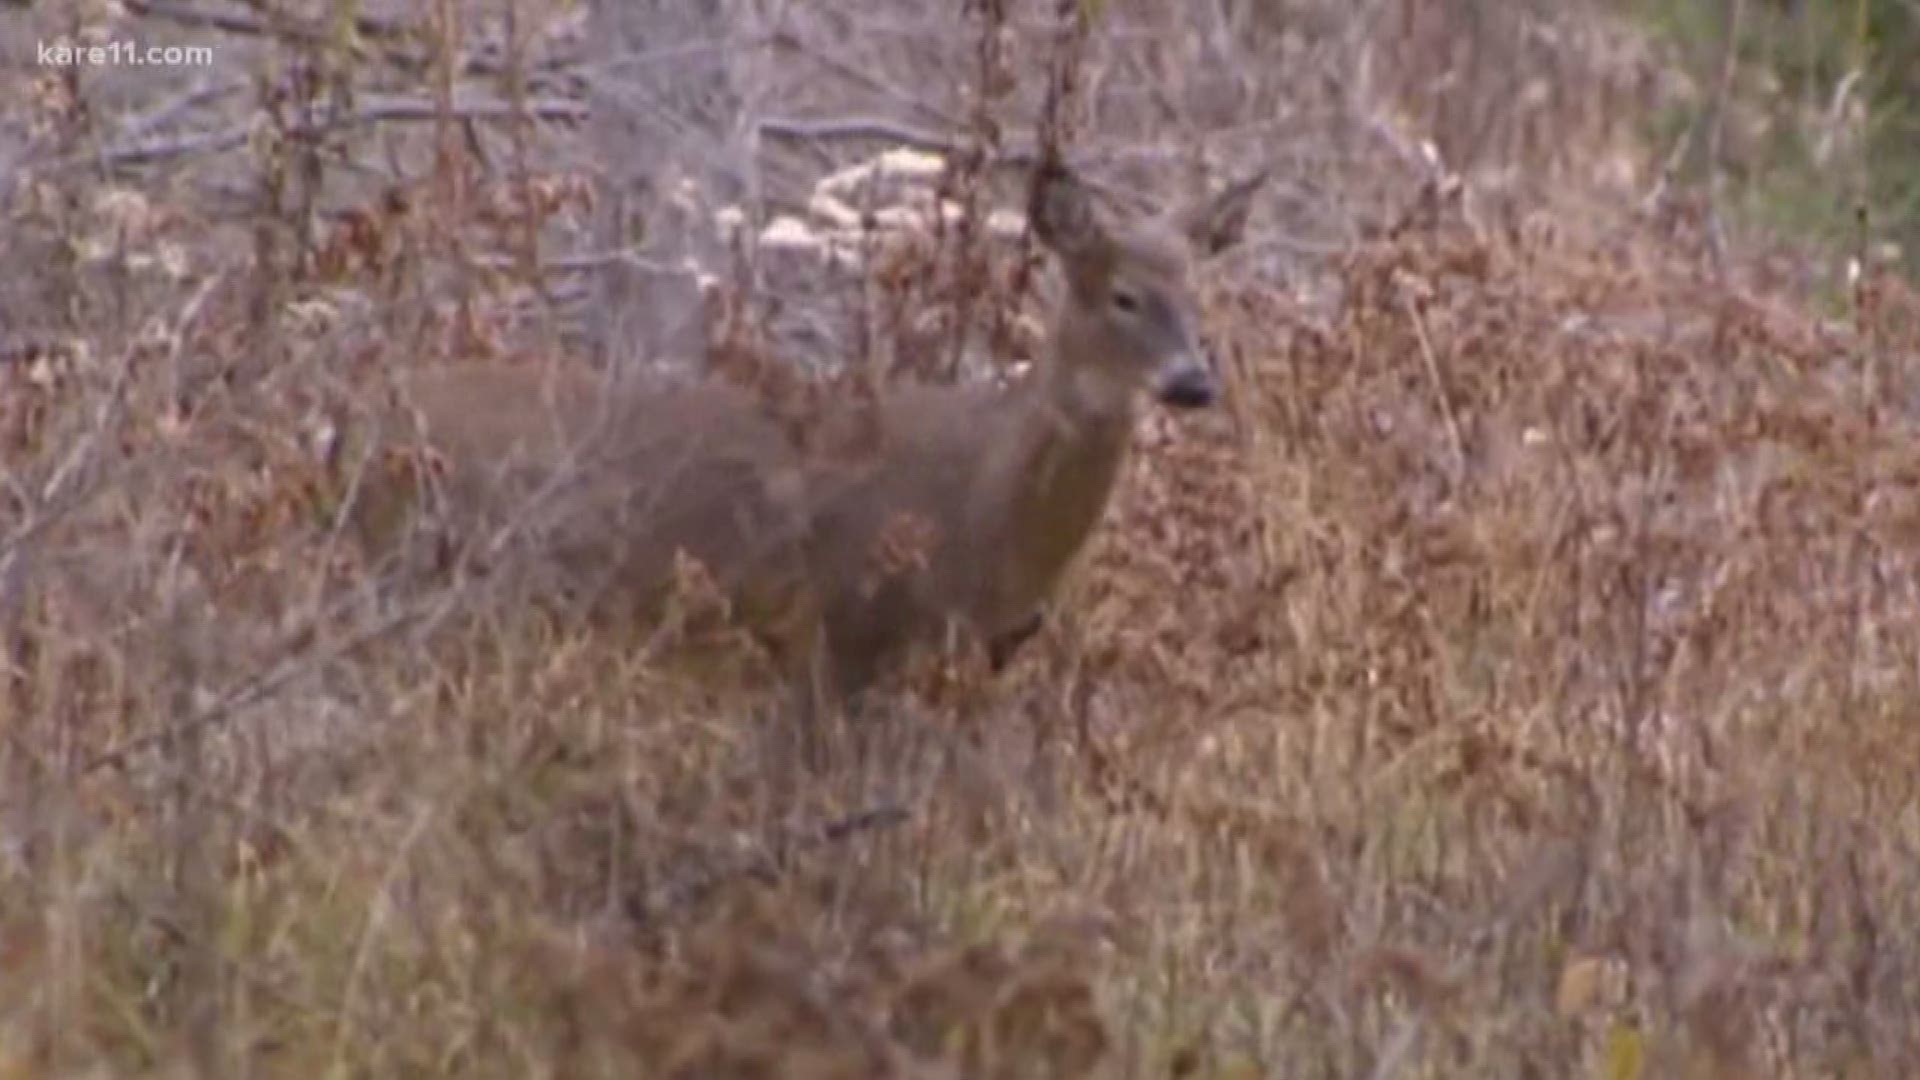 The special hunts, announced by the DNR on Tuesday, will take place in specific deer permit areas south of Interstate 90. Both residents and nonresidents can take part in the hunts from Dec. 21 to Dec. 23 and from Dec. 28 to Dec. 30.